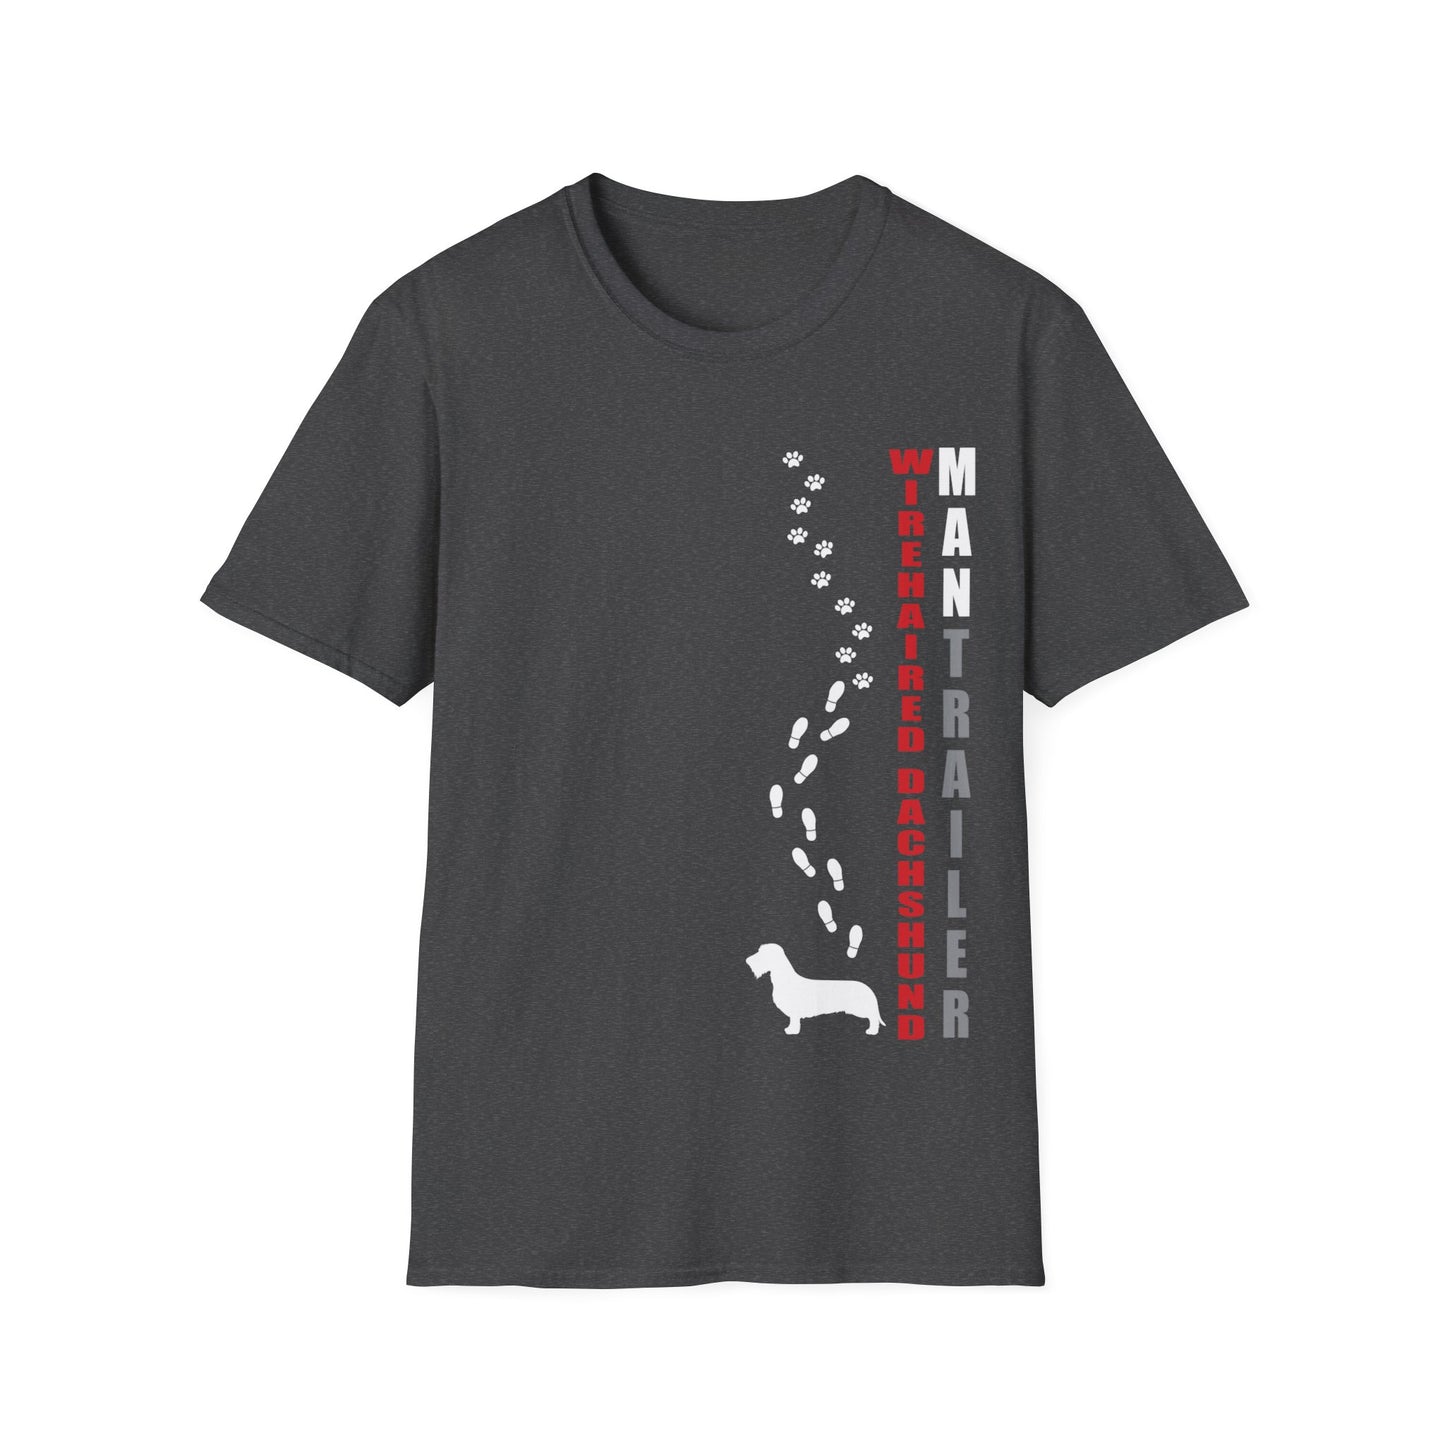 WIRE-HAIRED Dachshund - Man Trail Unisex Softstyle T-Shirt